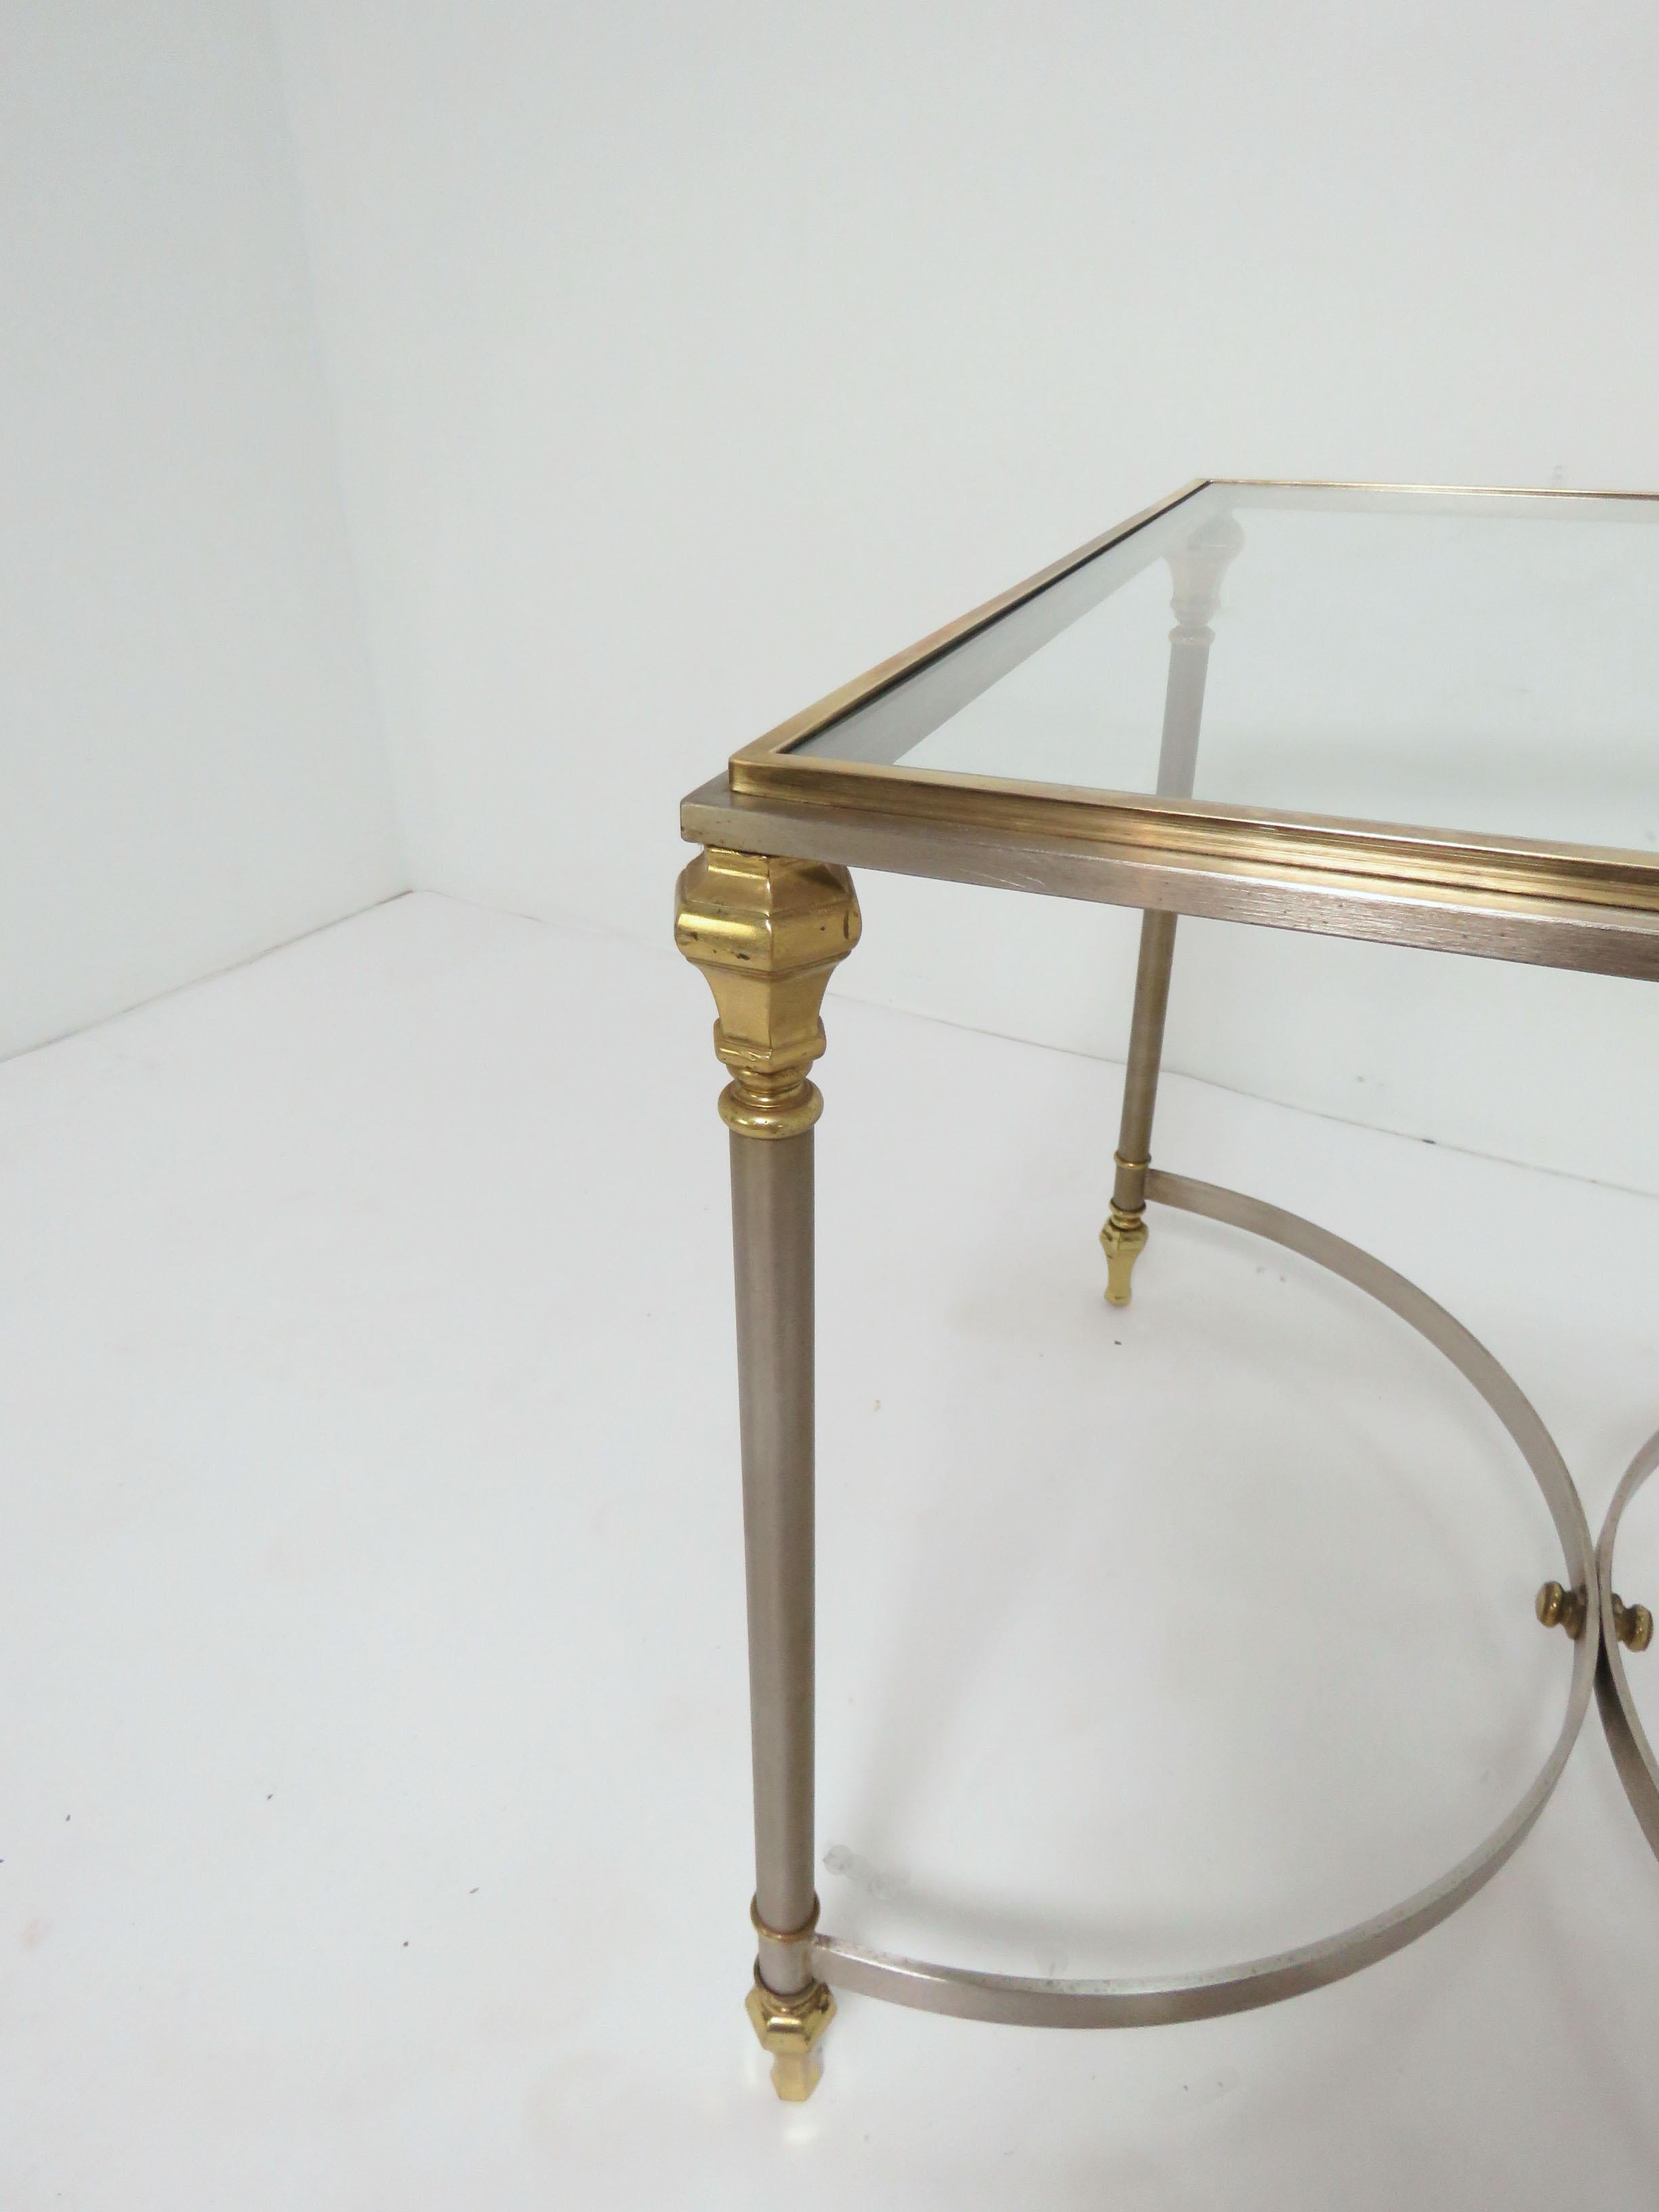 Pair of Maison Jansen Style Mixed Metal Side Tables, Made in Italy, circa 1960s (Italienisch)